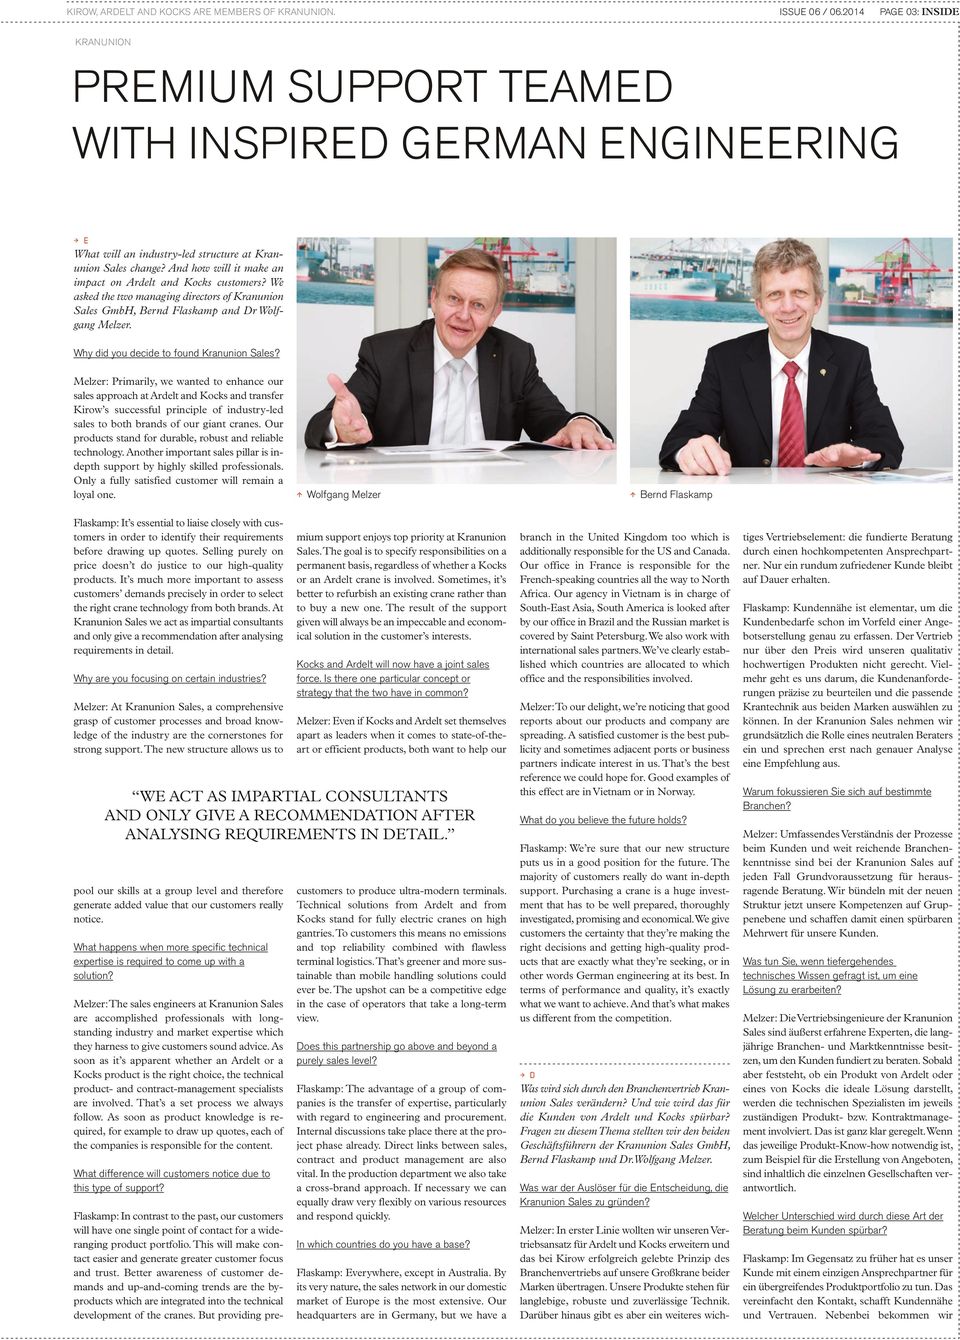 And how will it make an impact on Ardelt and Kocks customers? We asked the two managing directors of Kranunion Sales GmbH, Bernd Flaskamp and Dr Wolfgang Melzer.